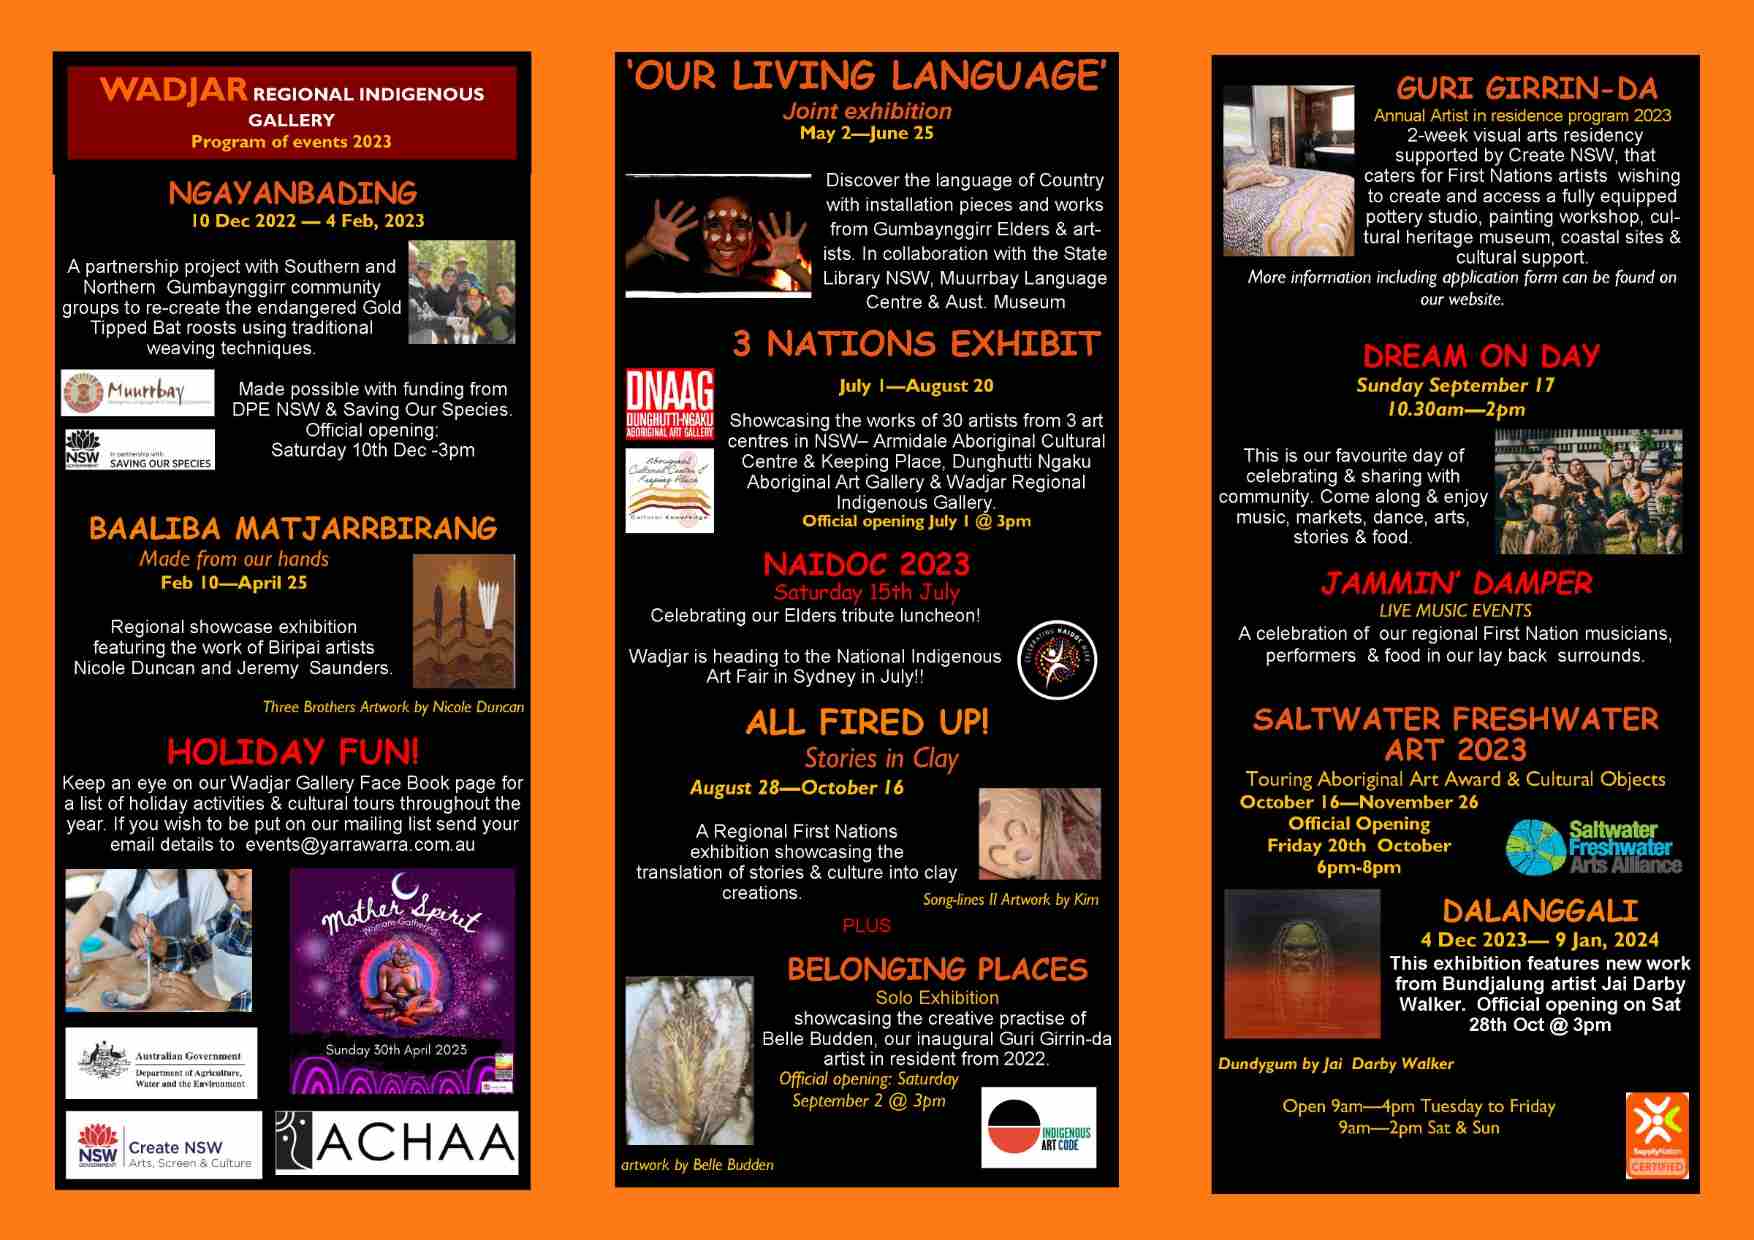 Wadjar Regional Indigenous Gallery Exhibition and Event Programs for 2023